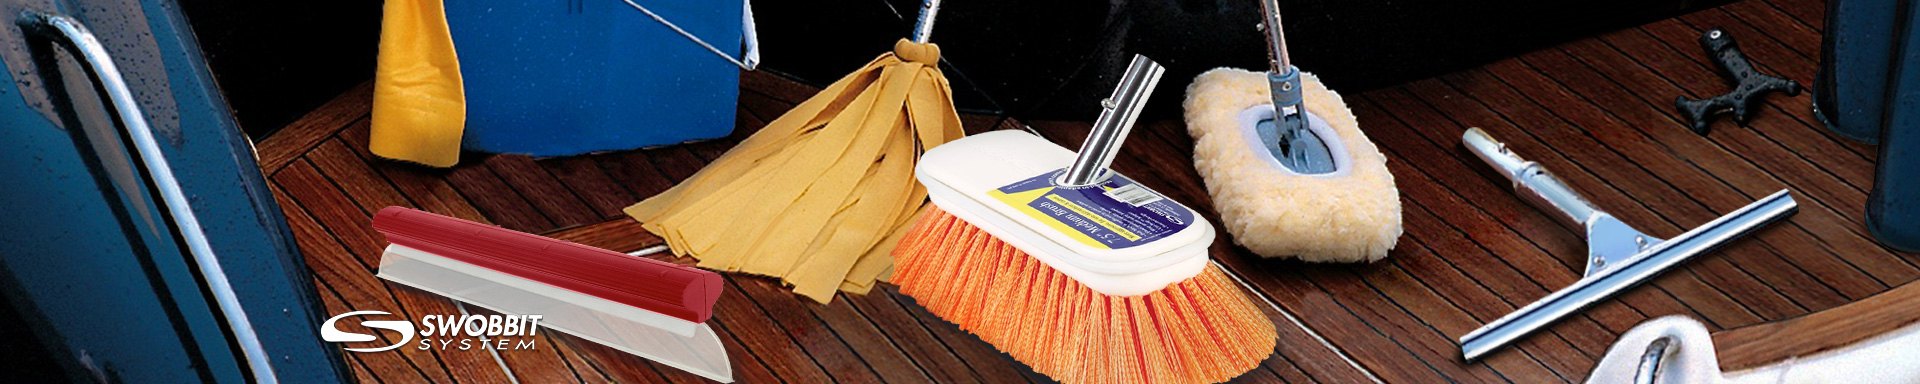 Swobbit Cleaning & Janitorial